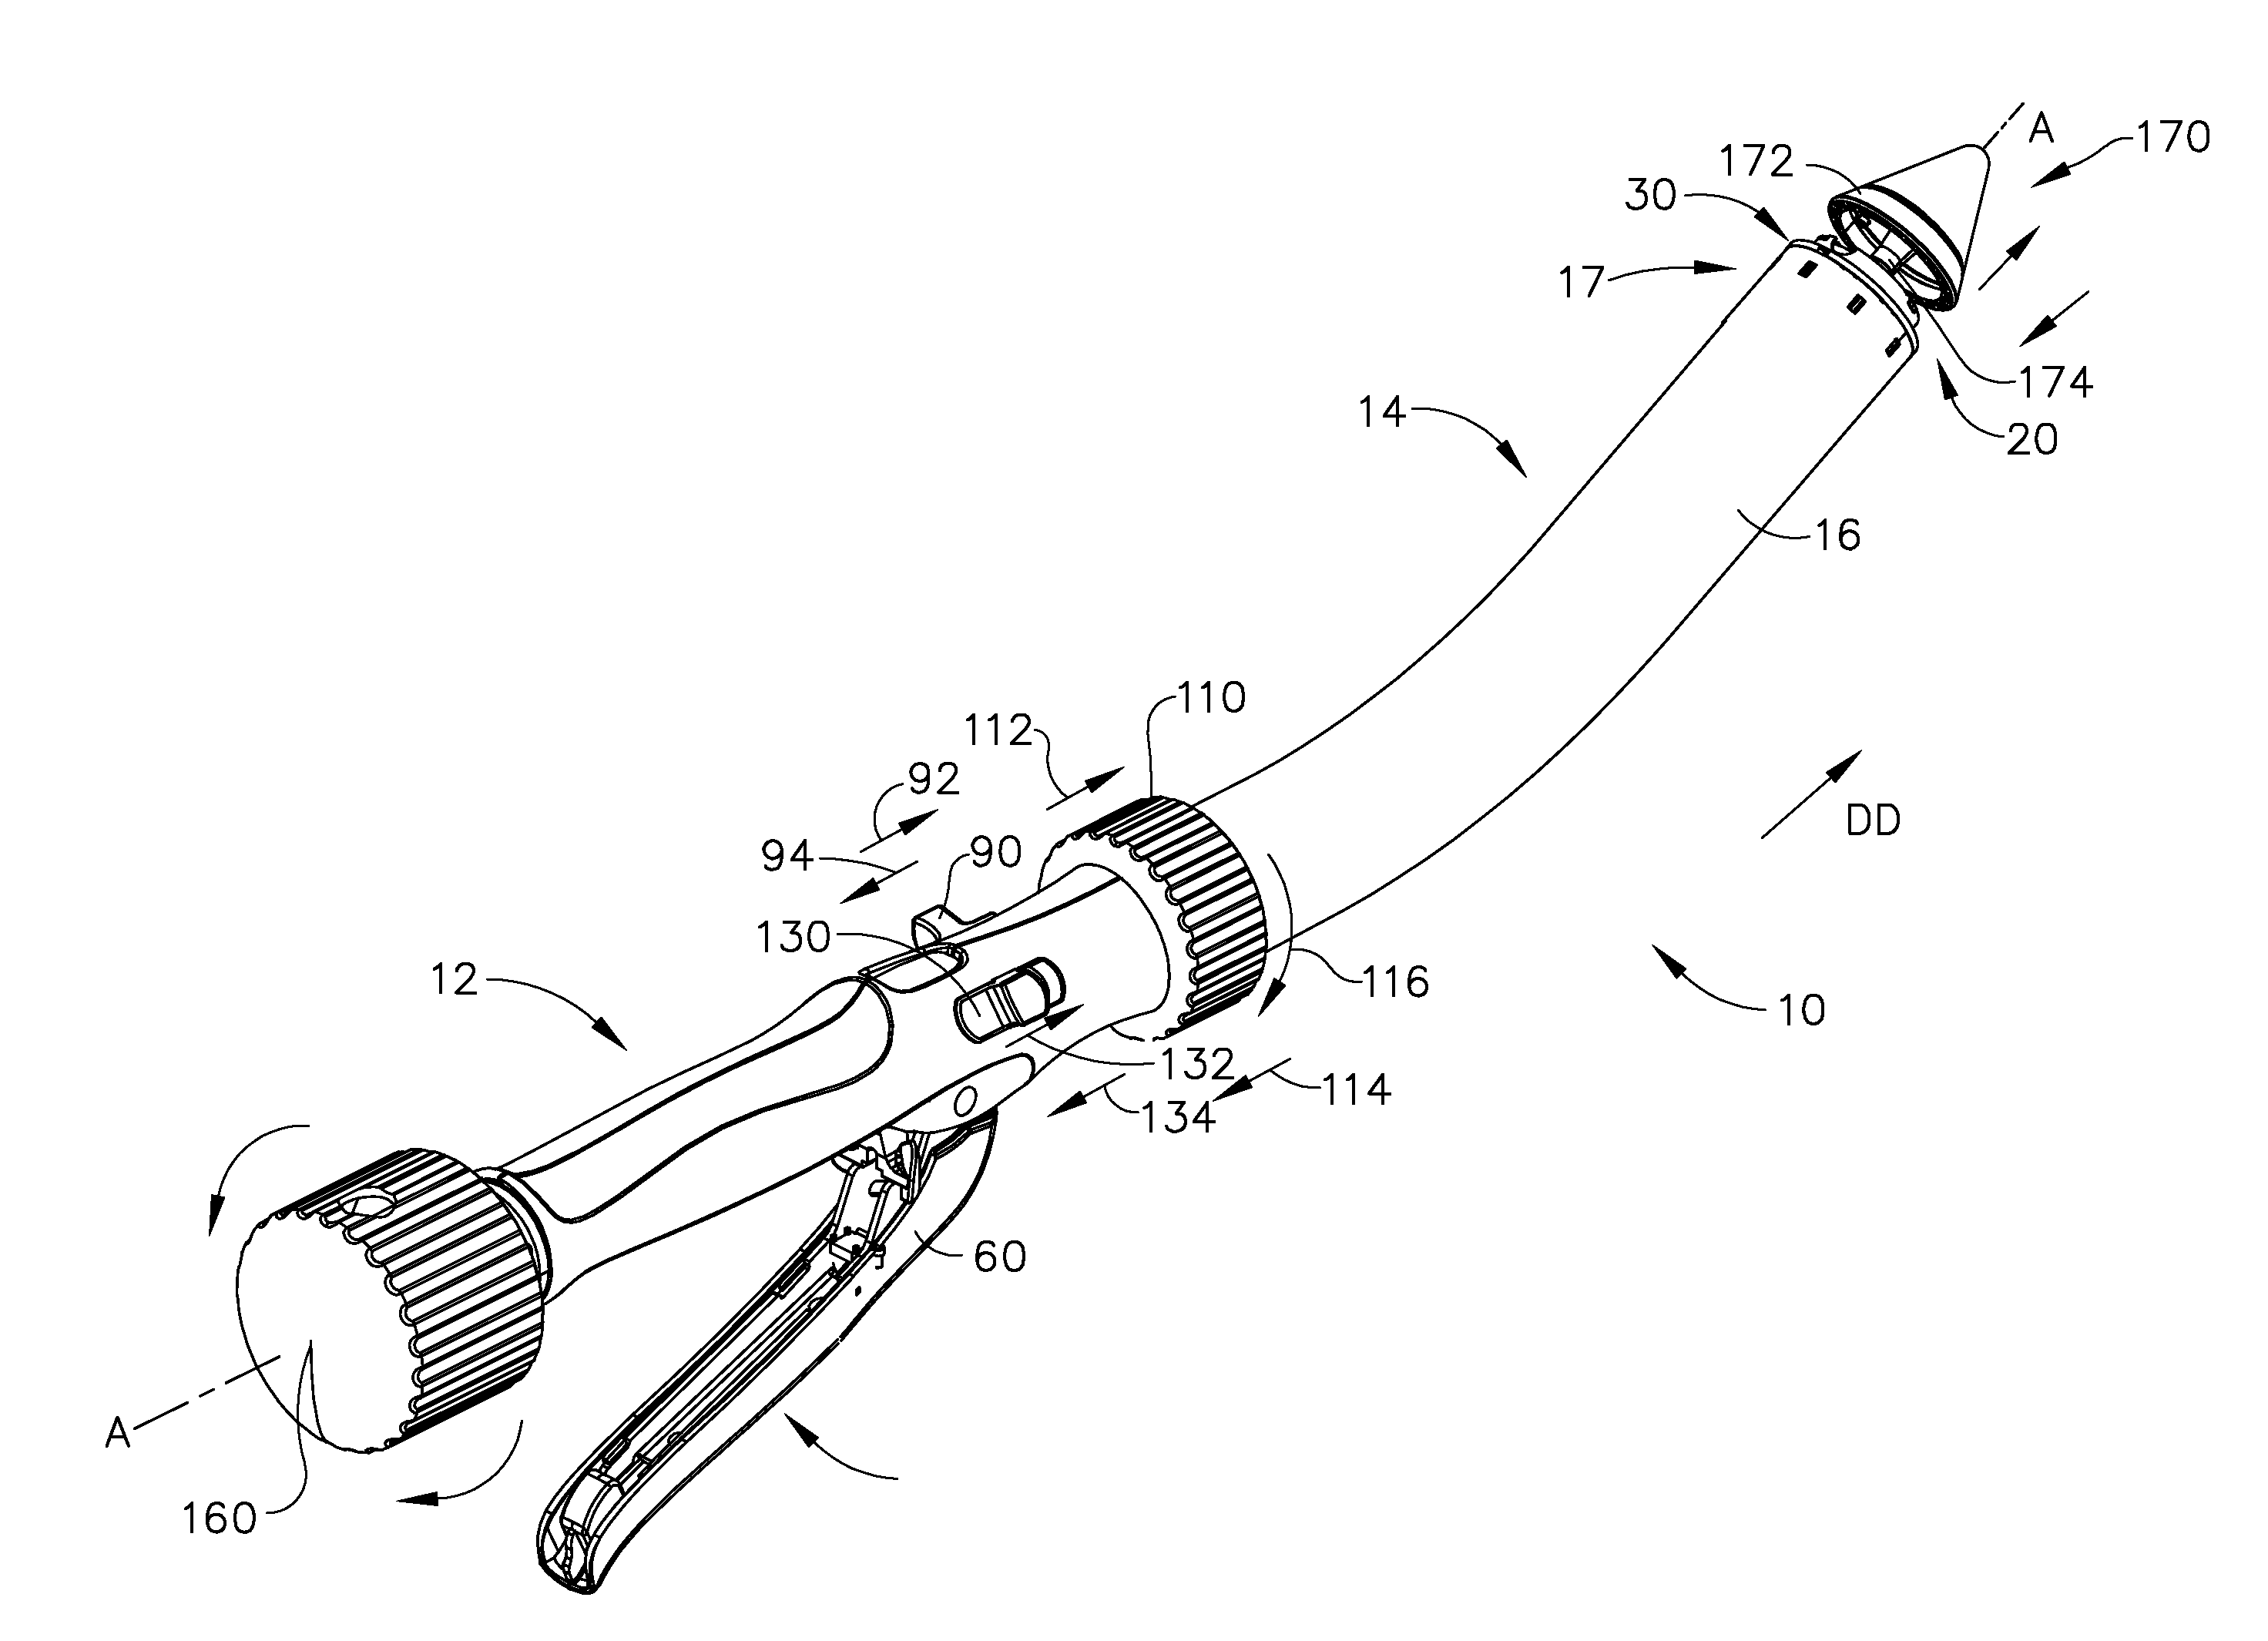 Circular stapling instruments with secondary cutting arrangements and methods of using same